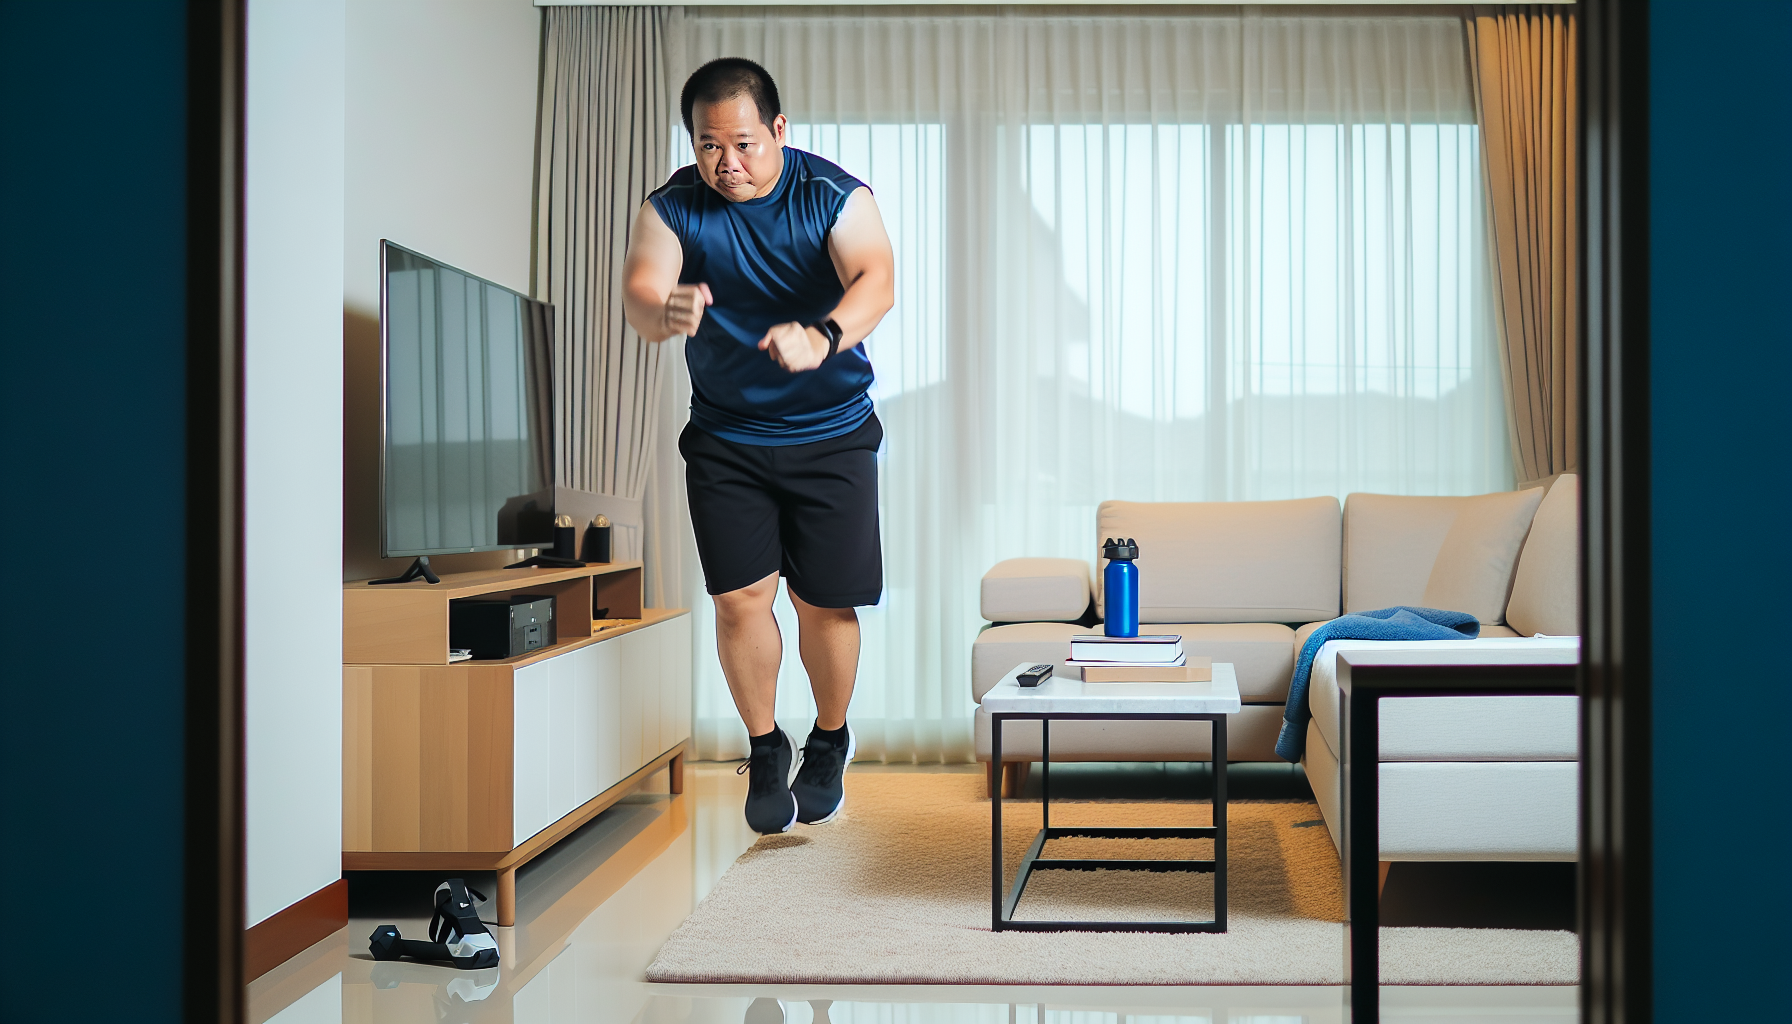 A person doing high intensity interval training (HIIT) at home